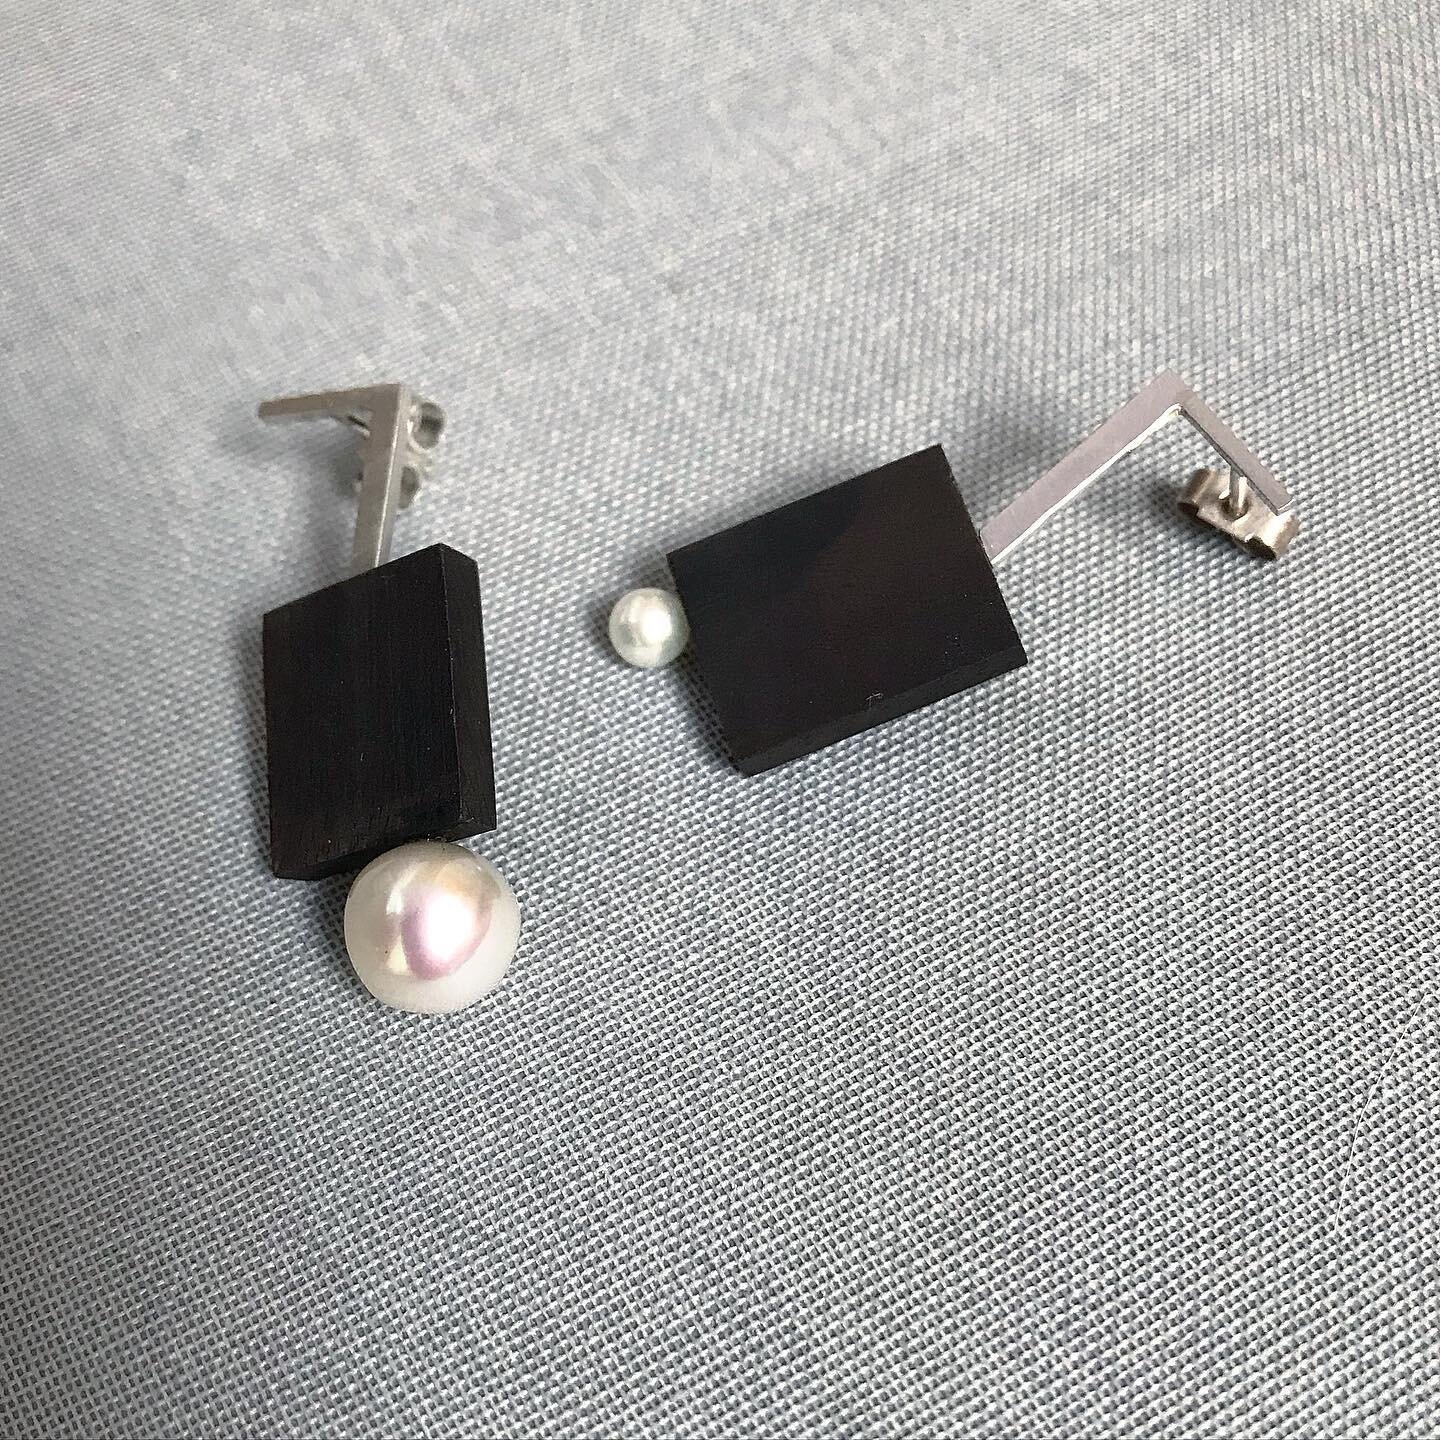 Almost matching pairs, part of my #30dayearringchallenge #30daydesignchallenge you might be able to see these @dazzleexhibitions @dovecotstudios this month 
#pearls #ebony #silver #earrings #bauhaus #sophietaeuberarp #wearableart #geometric #jeweller